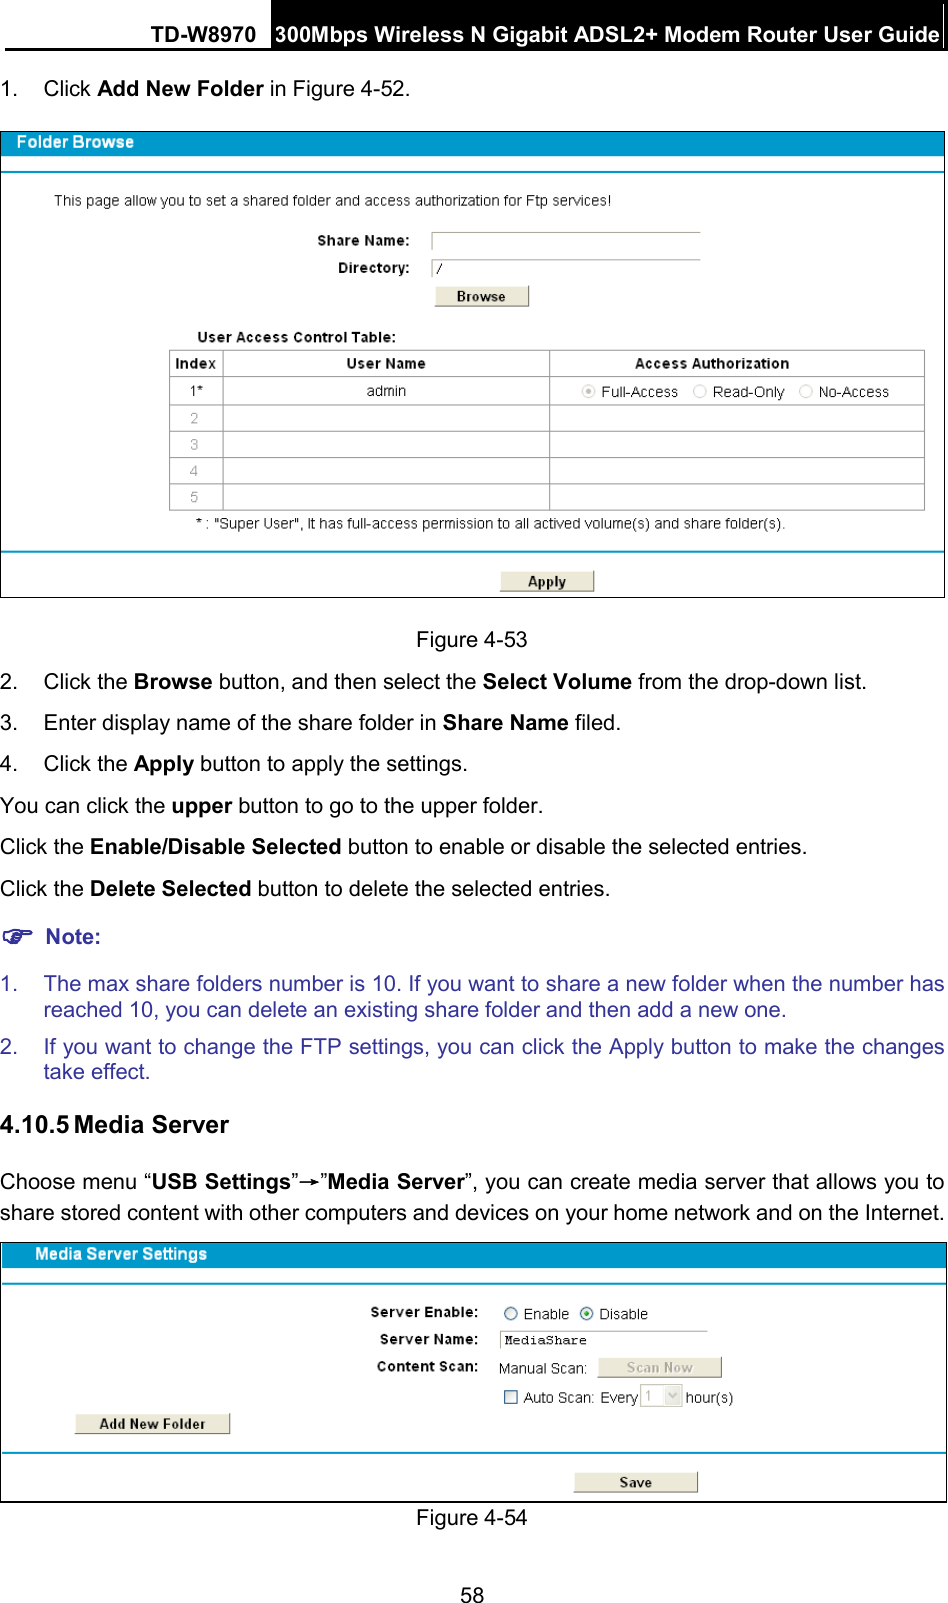 TD-W8970 300Mbps Wireless N Gigabit ADSL2+ Modem Router User Guide  1. Click Add New Folder in Figure 4-52.  Figure 4-53   2.  Click the Browse button, and then select the Select Volume from the drop-down list. 3. Enter display name of the share folder in Share Name filed. 4. Click the Apply button to apply the settings. You can click the upper button to go to the upper folder. Click the Enable/Disable Selected button to enable or disable the selected entries. Click the Delete Selected button to delete the selected entries.  Note: 1. The max share folders number is 10. If you want to share a new folder when the number has reached 10, you can delete an existing share folder and then add a new one.   2. If you want to change the FTP settings, you can click the Apply button to make the changes take effect.   4.10.5 Media Server Choose menu “USB Settings”→”Media Server”, you can create media server that allows you to share stored content with other computers and devices on your home network and on the Internet.  Figure 4-54 58 